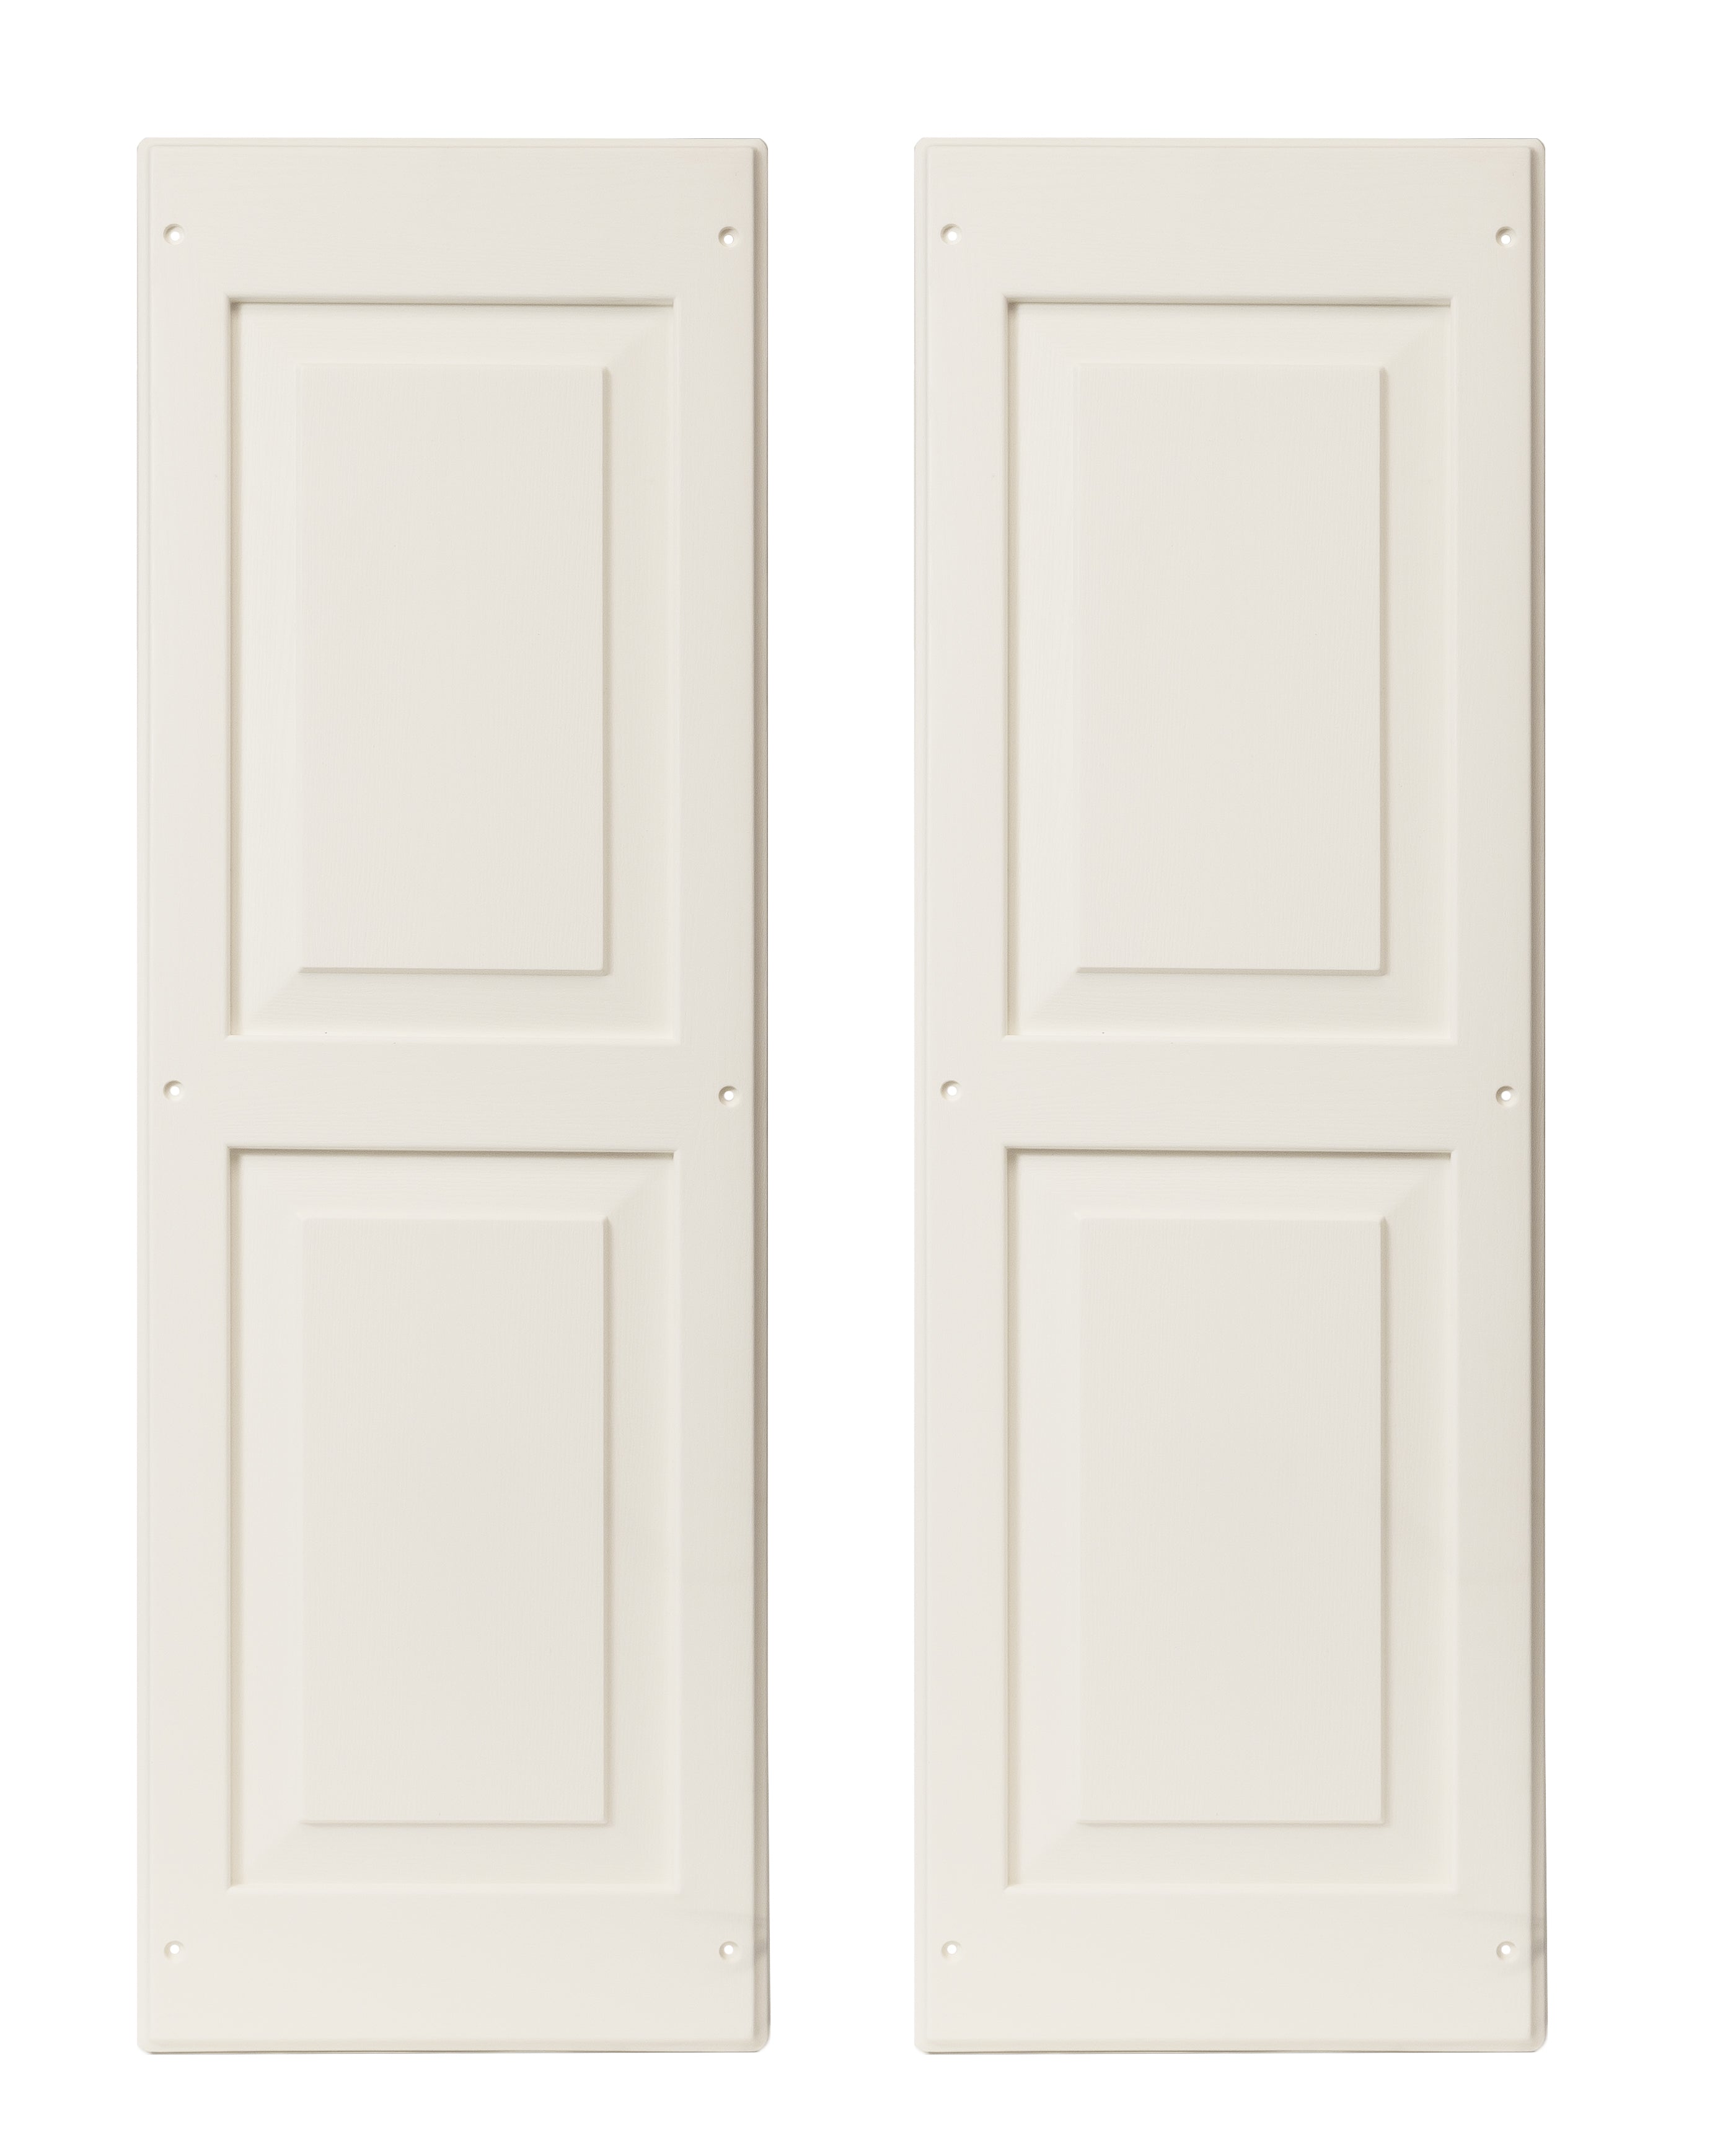 Pair of 12" W x 36" H Raised Panel White Shutters for Sheds, Playhouses, and MORE 